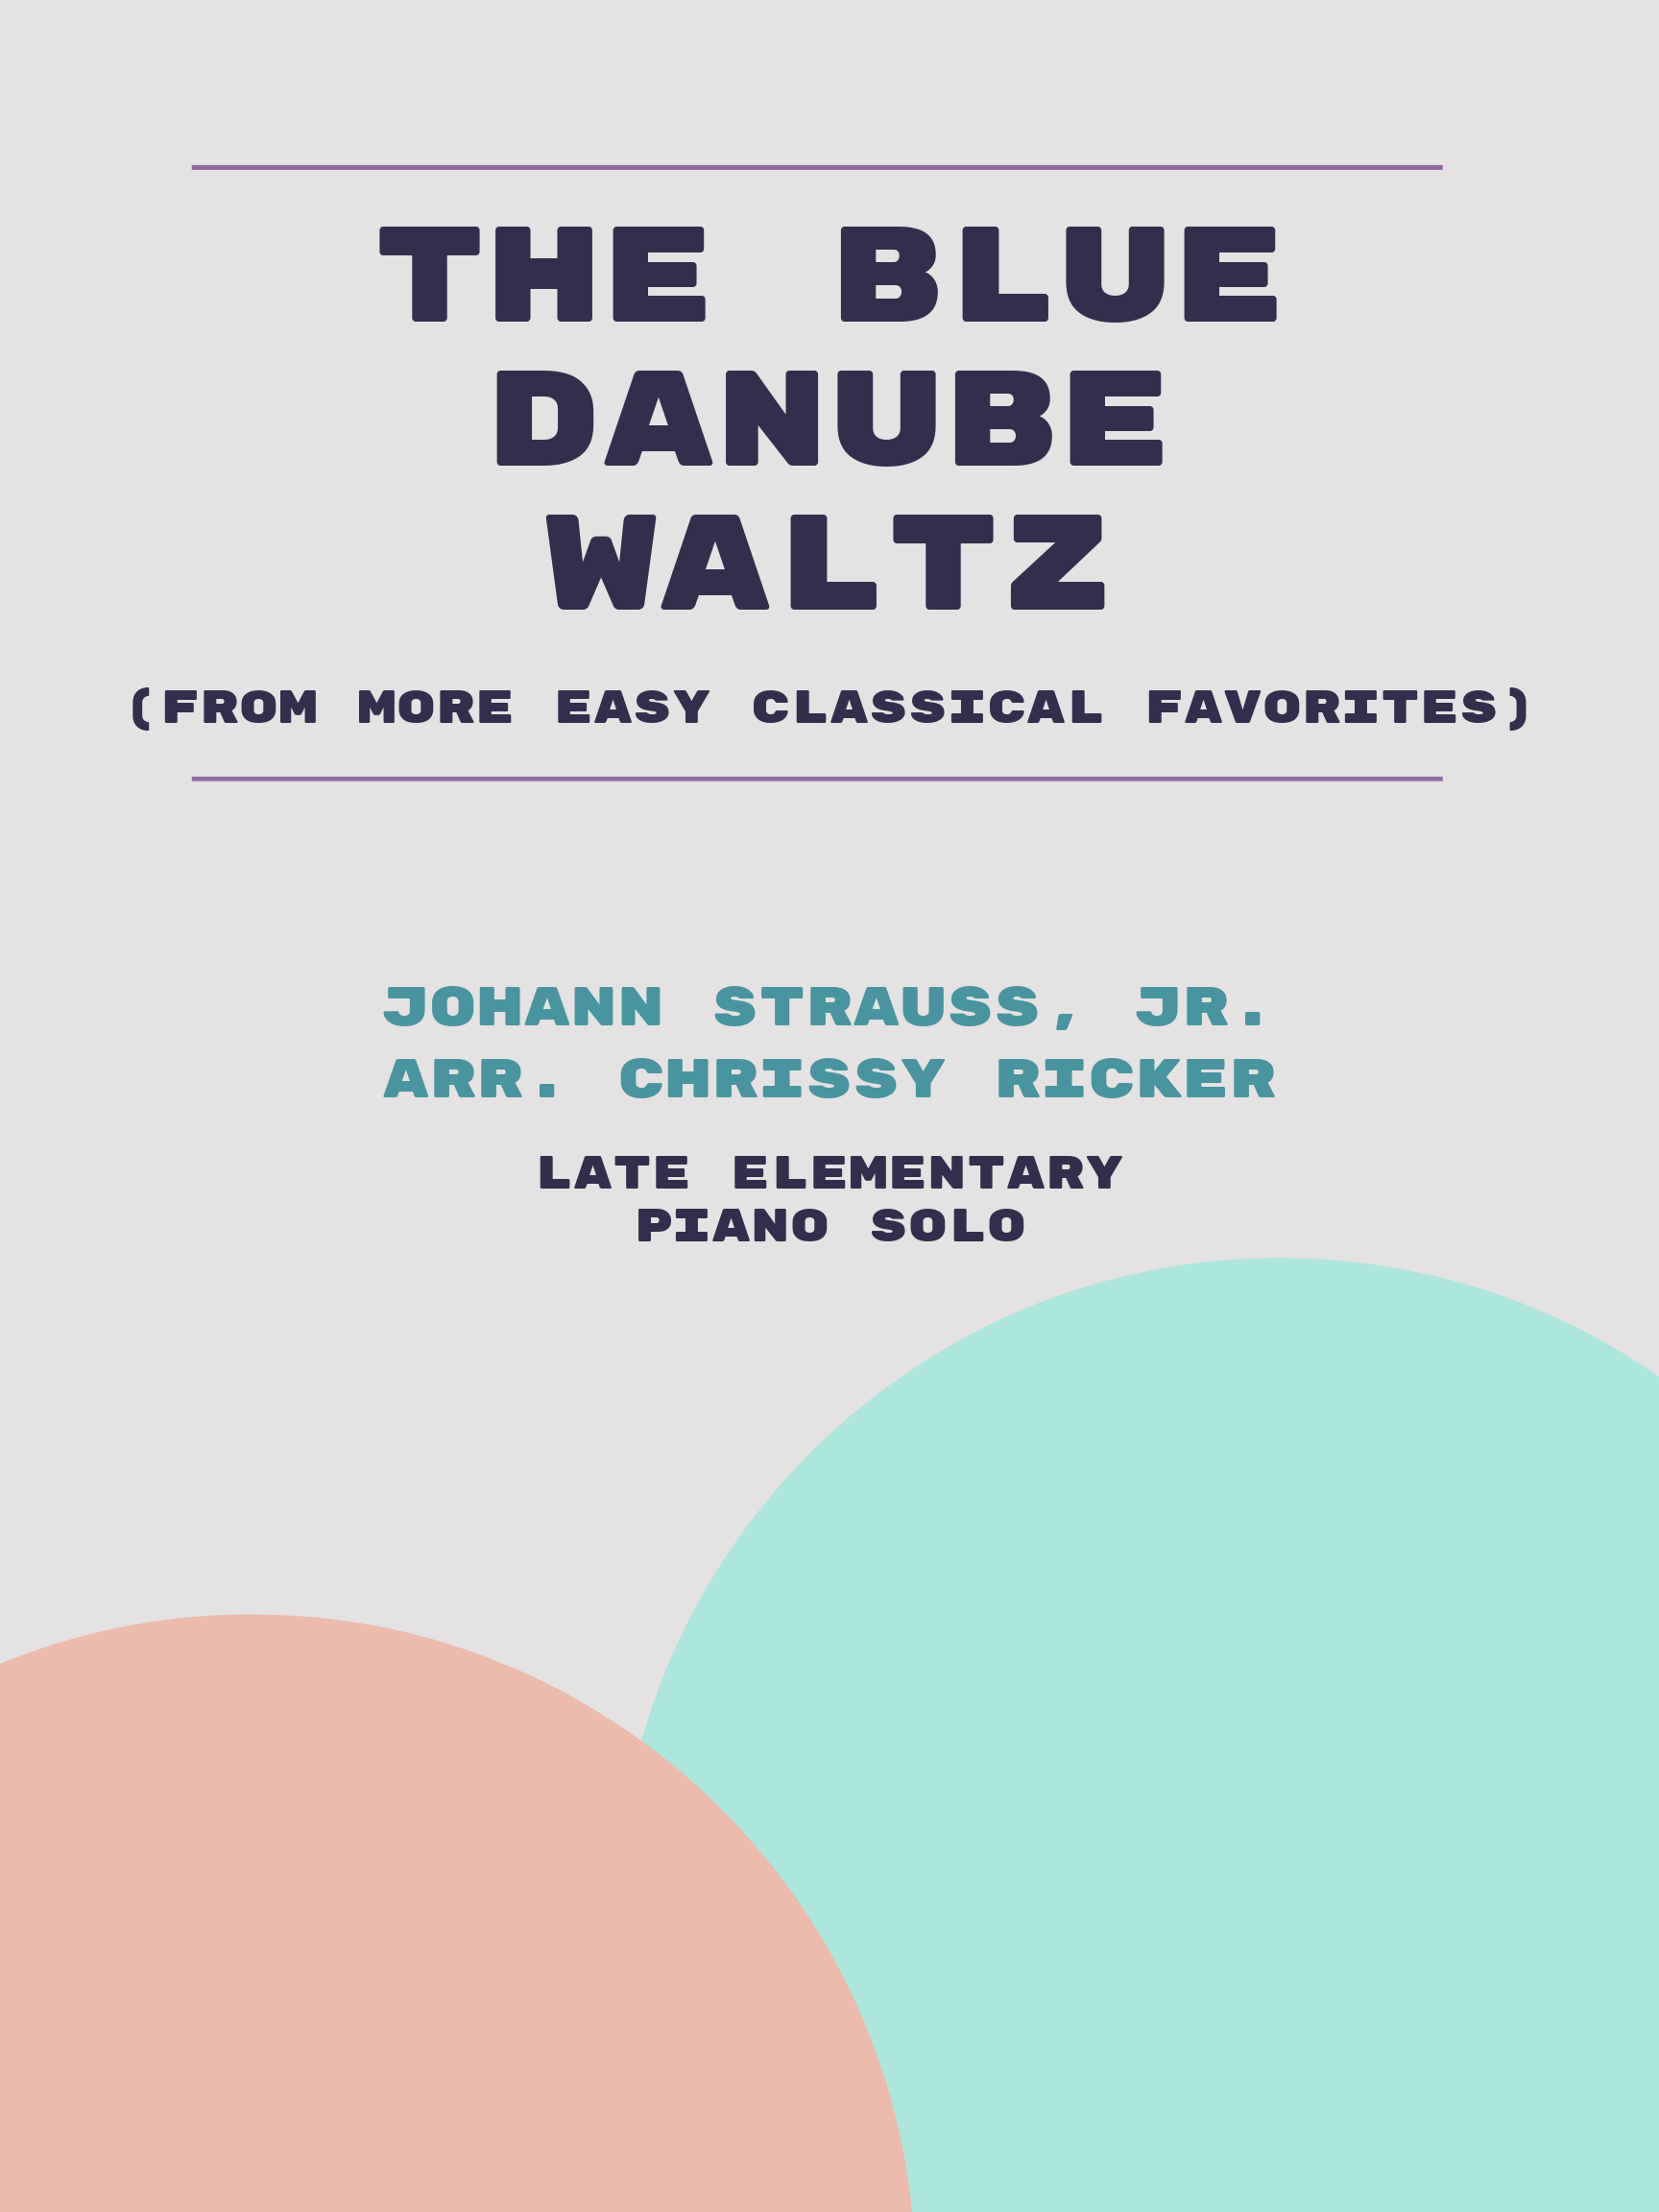 The Blue Danube Waltz Sample Page